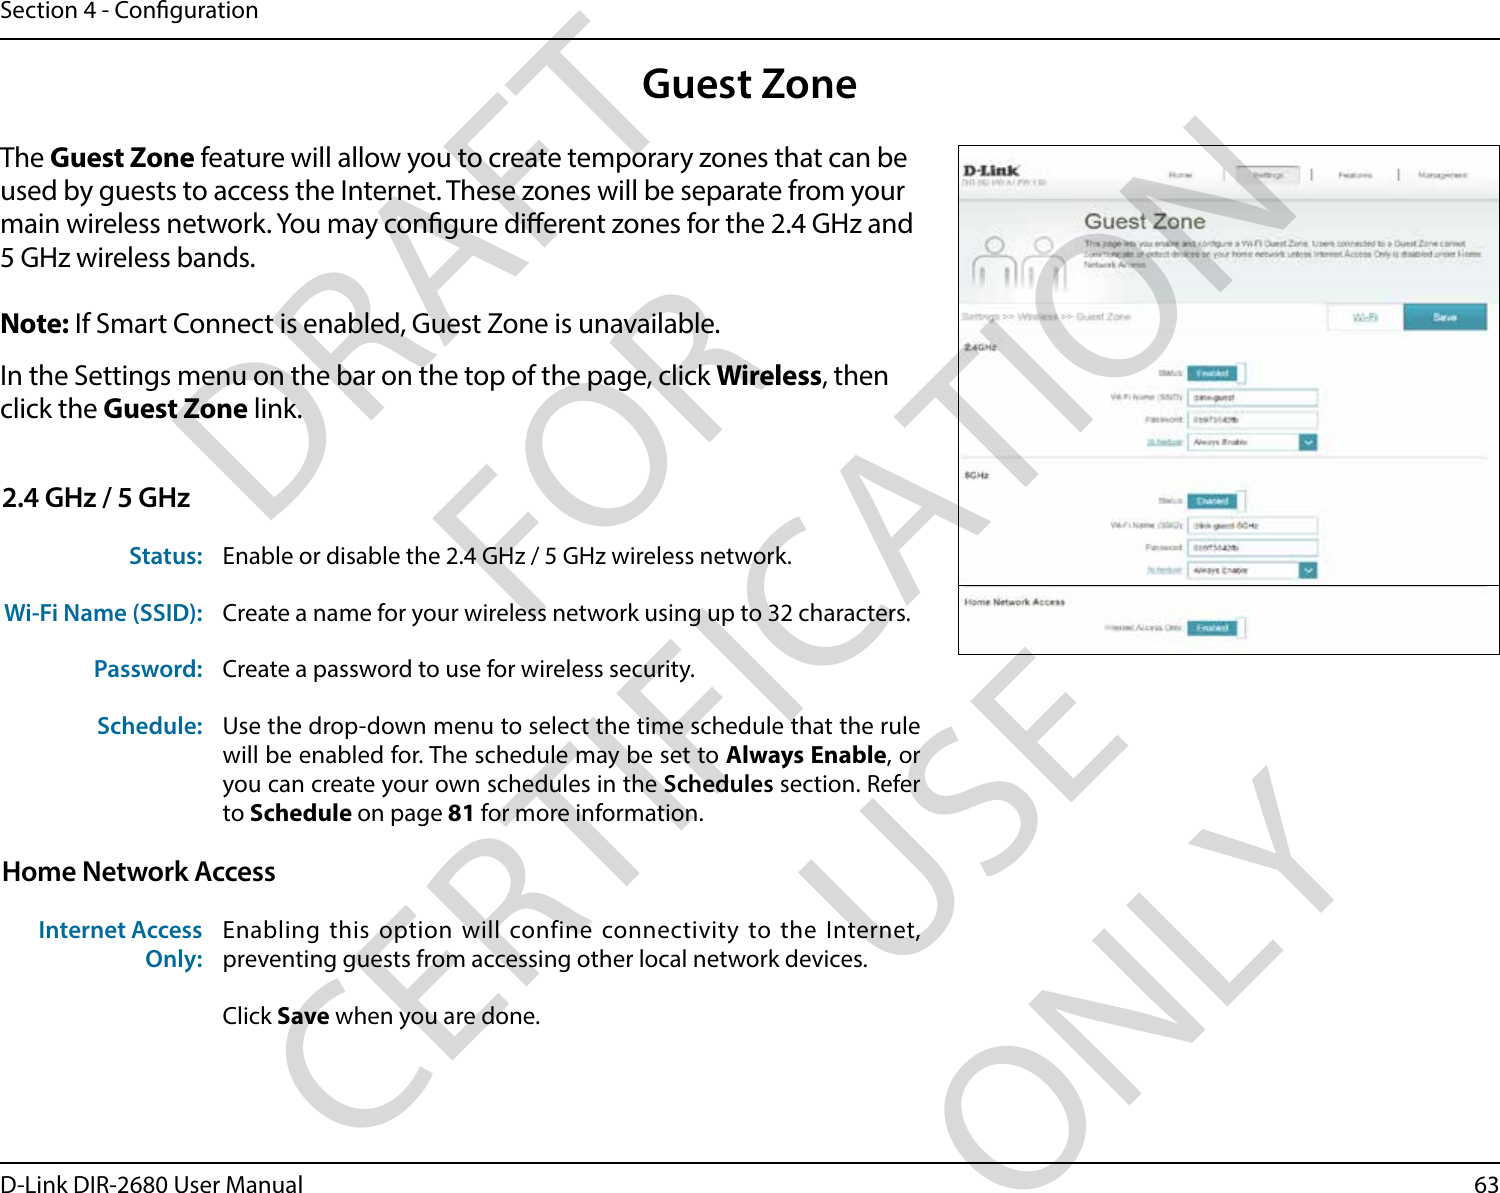 63D-Link DIR-2680 User ManualSection 4 - CongurationGuest ZoneIn the Settings menu on the bar on the top of the page, click Wireless, then click the Guest Zone link. The Guest Zone feature will allow you to create temporary zones that can be used by guests to access the Internet. These zones will be separate from your main wireless network. You may congure dierent zones for the 2.4 GHz and 5 GHz wireless bands.Note: If Smart Connect is enabled, Guest Zone is unavailable.2.4 GHz / 5 GHzStatus: Enable or disable the 2.4 GHz / 5 GHz wireless network.Wi-Fi Name (SSID): Create a name for your wireless network using up to 32 characters. Password: Create a password to use for wireless security. Schedule: Use the drop-down menu to select the time schedule that the rule will be enabled for. The schedule may be set to Always Enable, or you can create your own schedules in the Schedules section. Refer to Schedule on page 81 for more information.Home Network AccessInternet Access Only:Enabling this option will confine connectivity to the Internet, preventing guests from accessing other local network devices.Click Save when you are done.DRAFT FOR CERTIFICATION USE ONLY